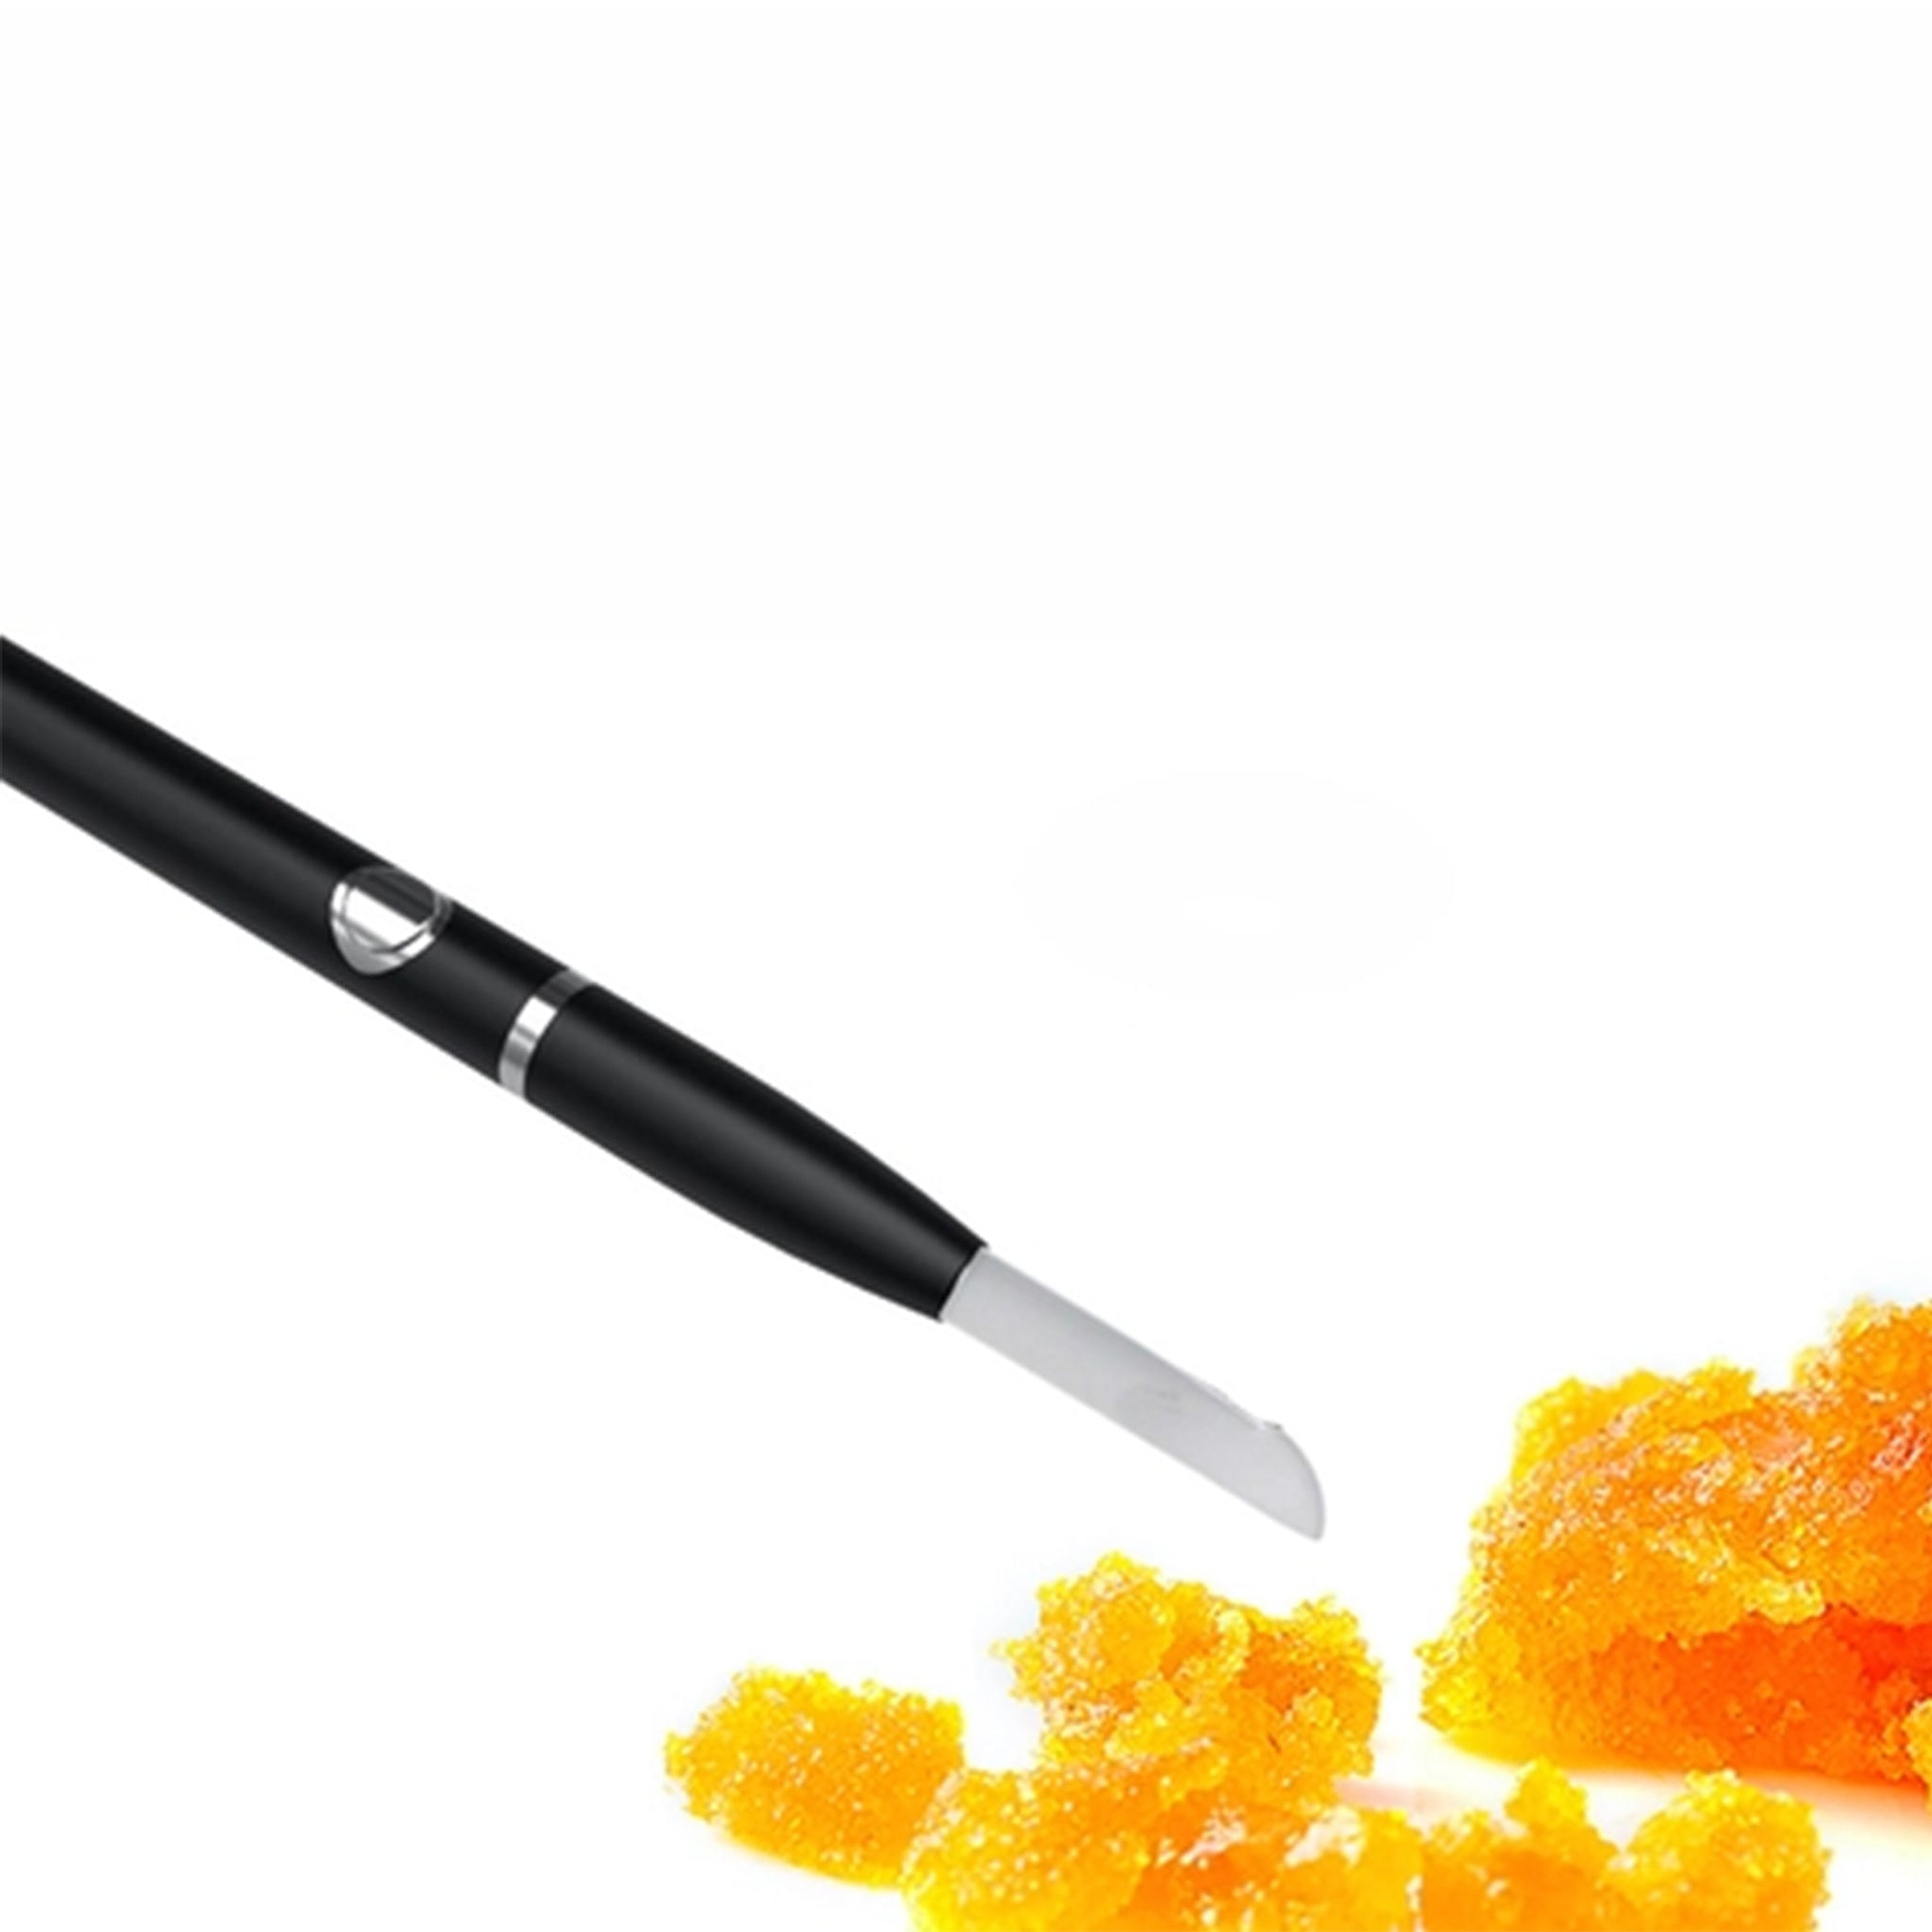 Shop Hato Karpen Hot Knife Dab Tool Hato to satisfy all the family members